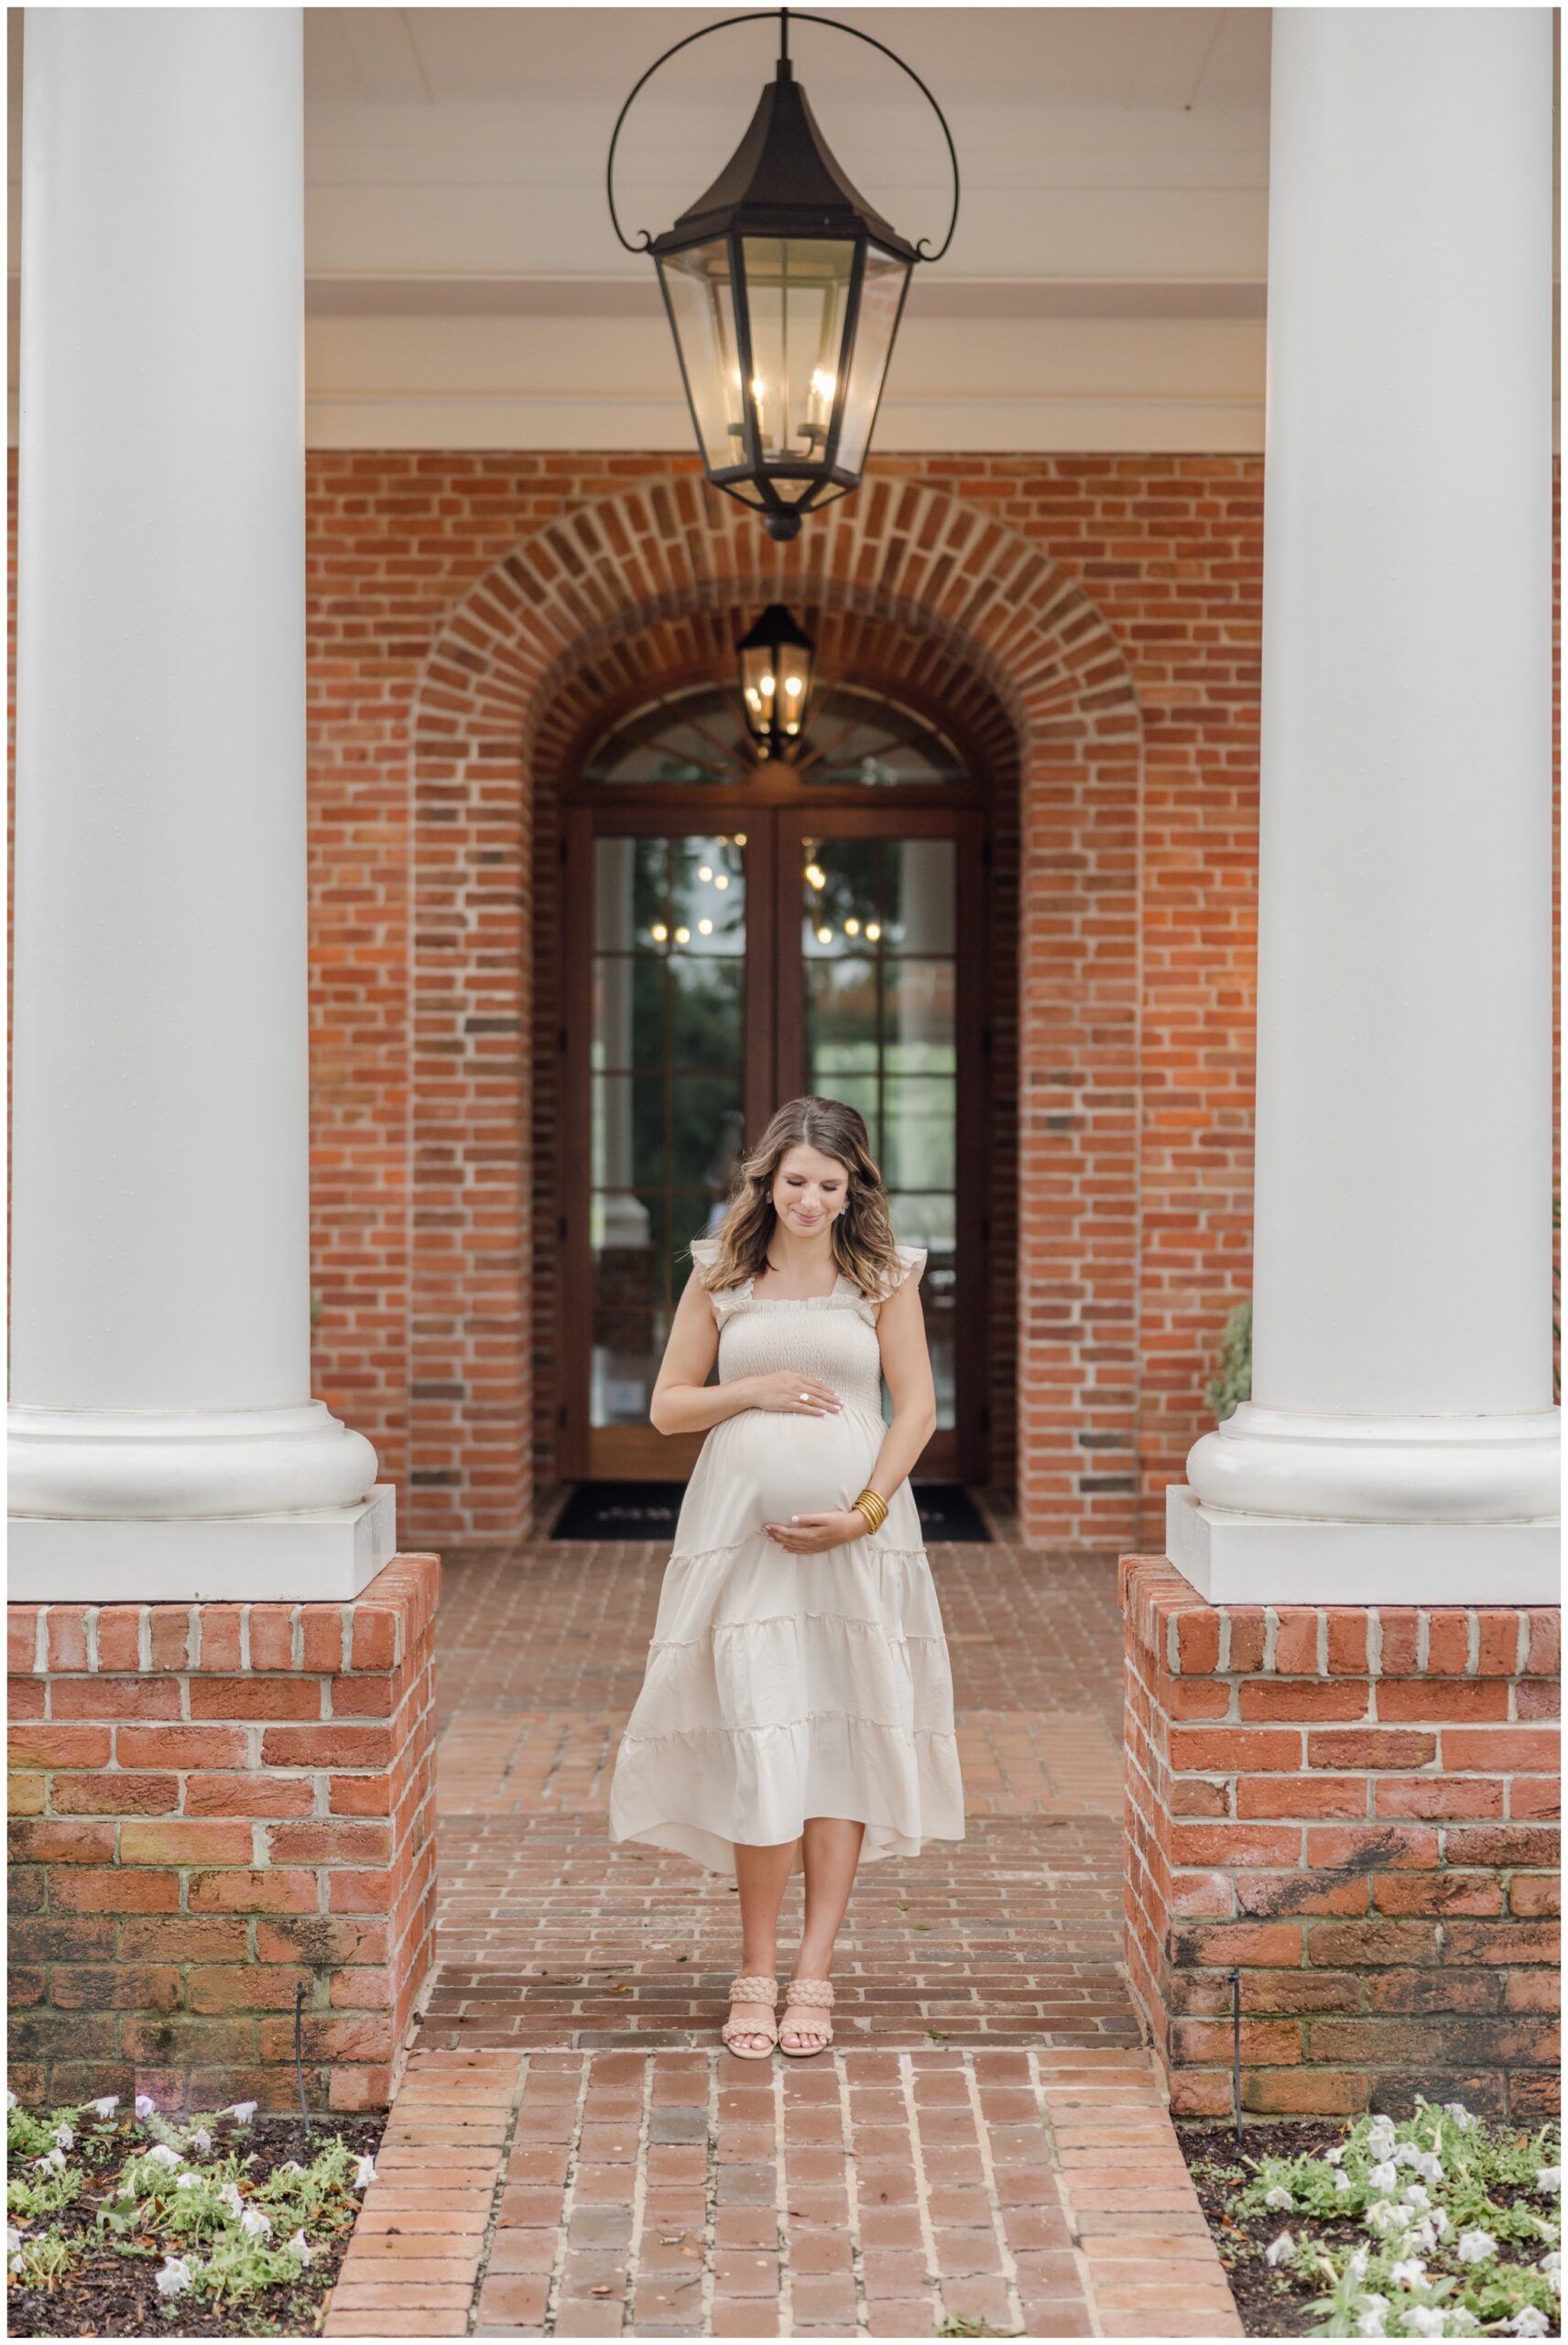 Expecting mother cradling her belly framed between arches in front of a brick building.